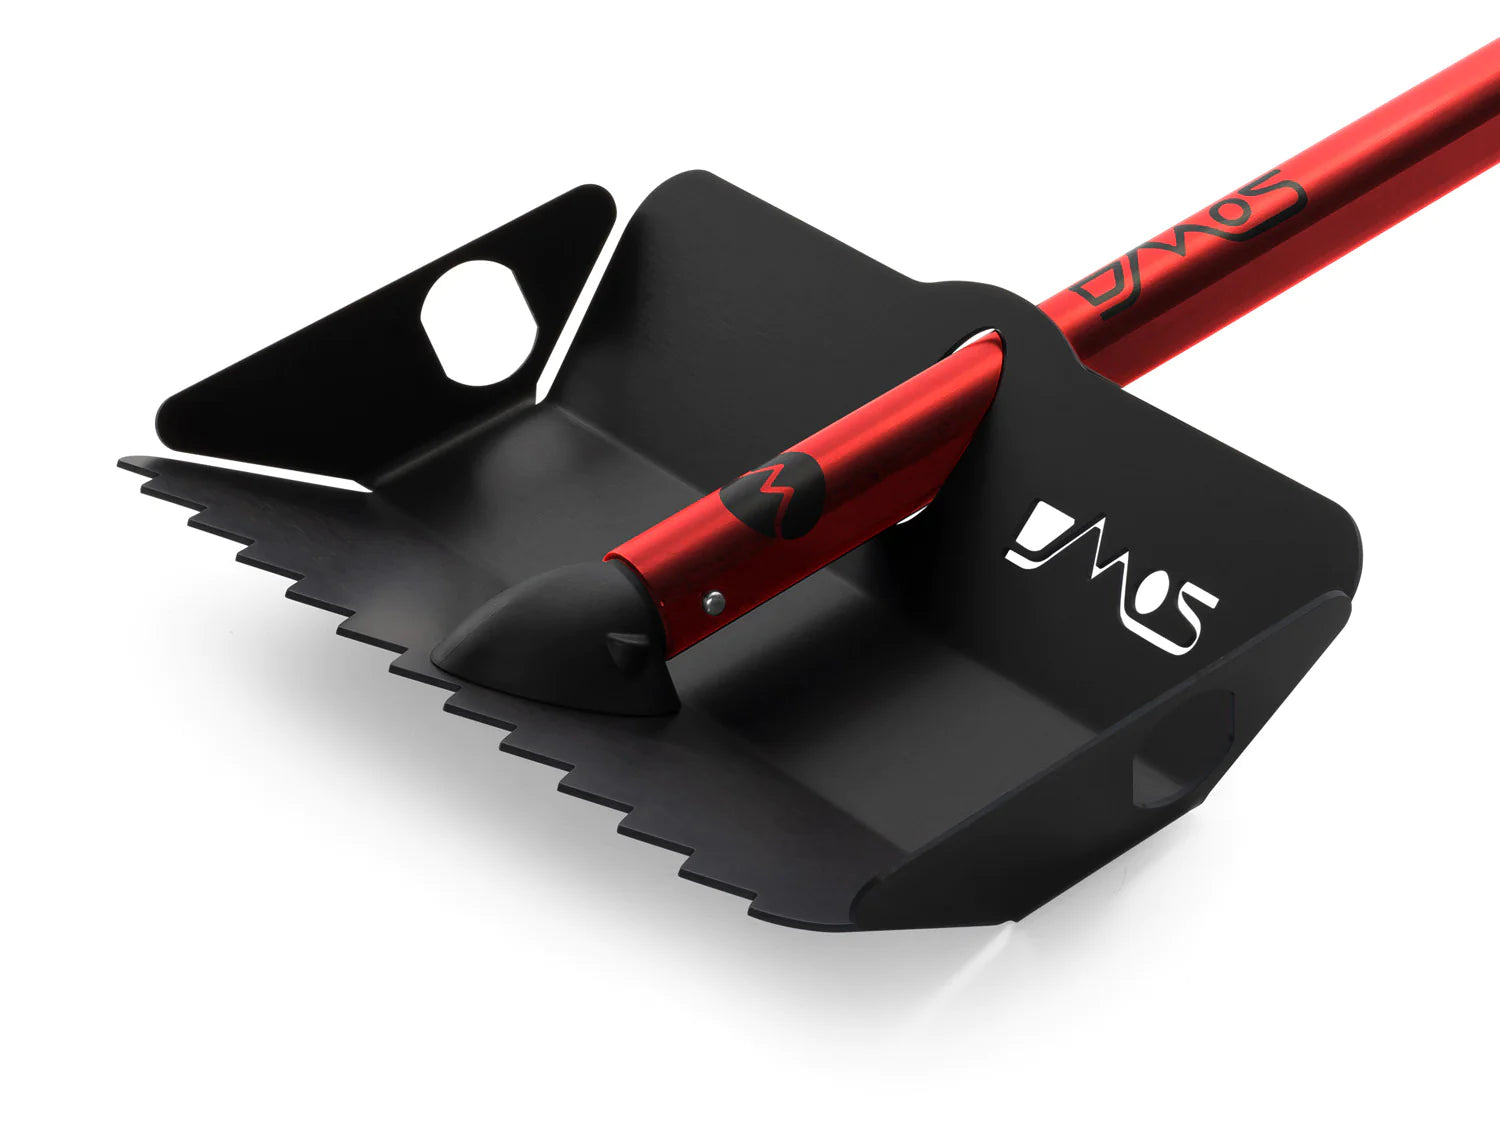 DMOS Stealth Shovel - Black Anodized and Red Handle